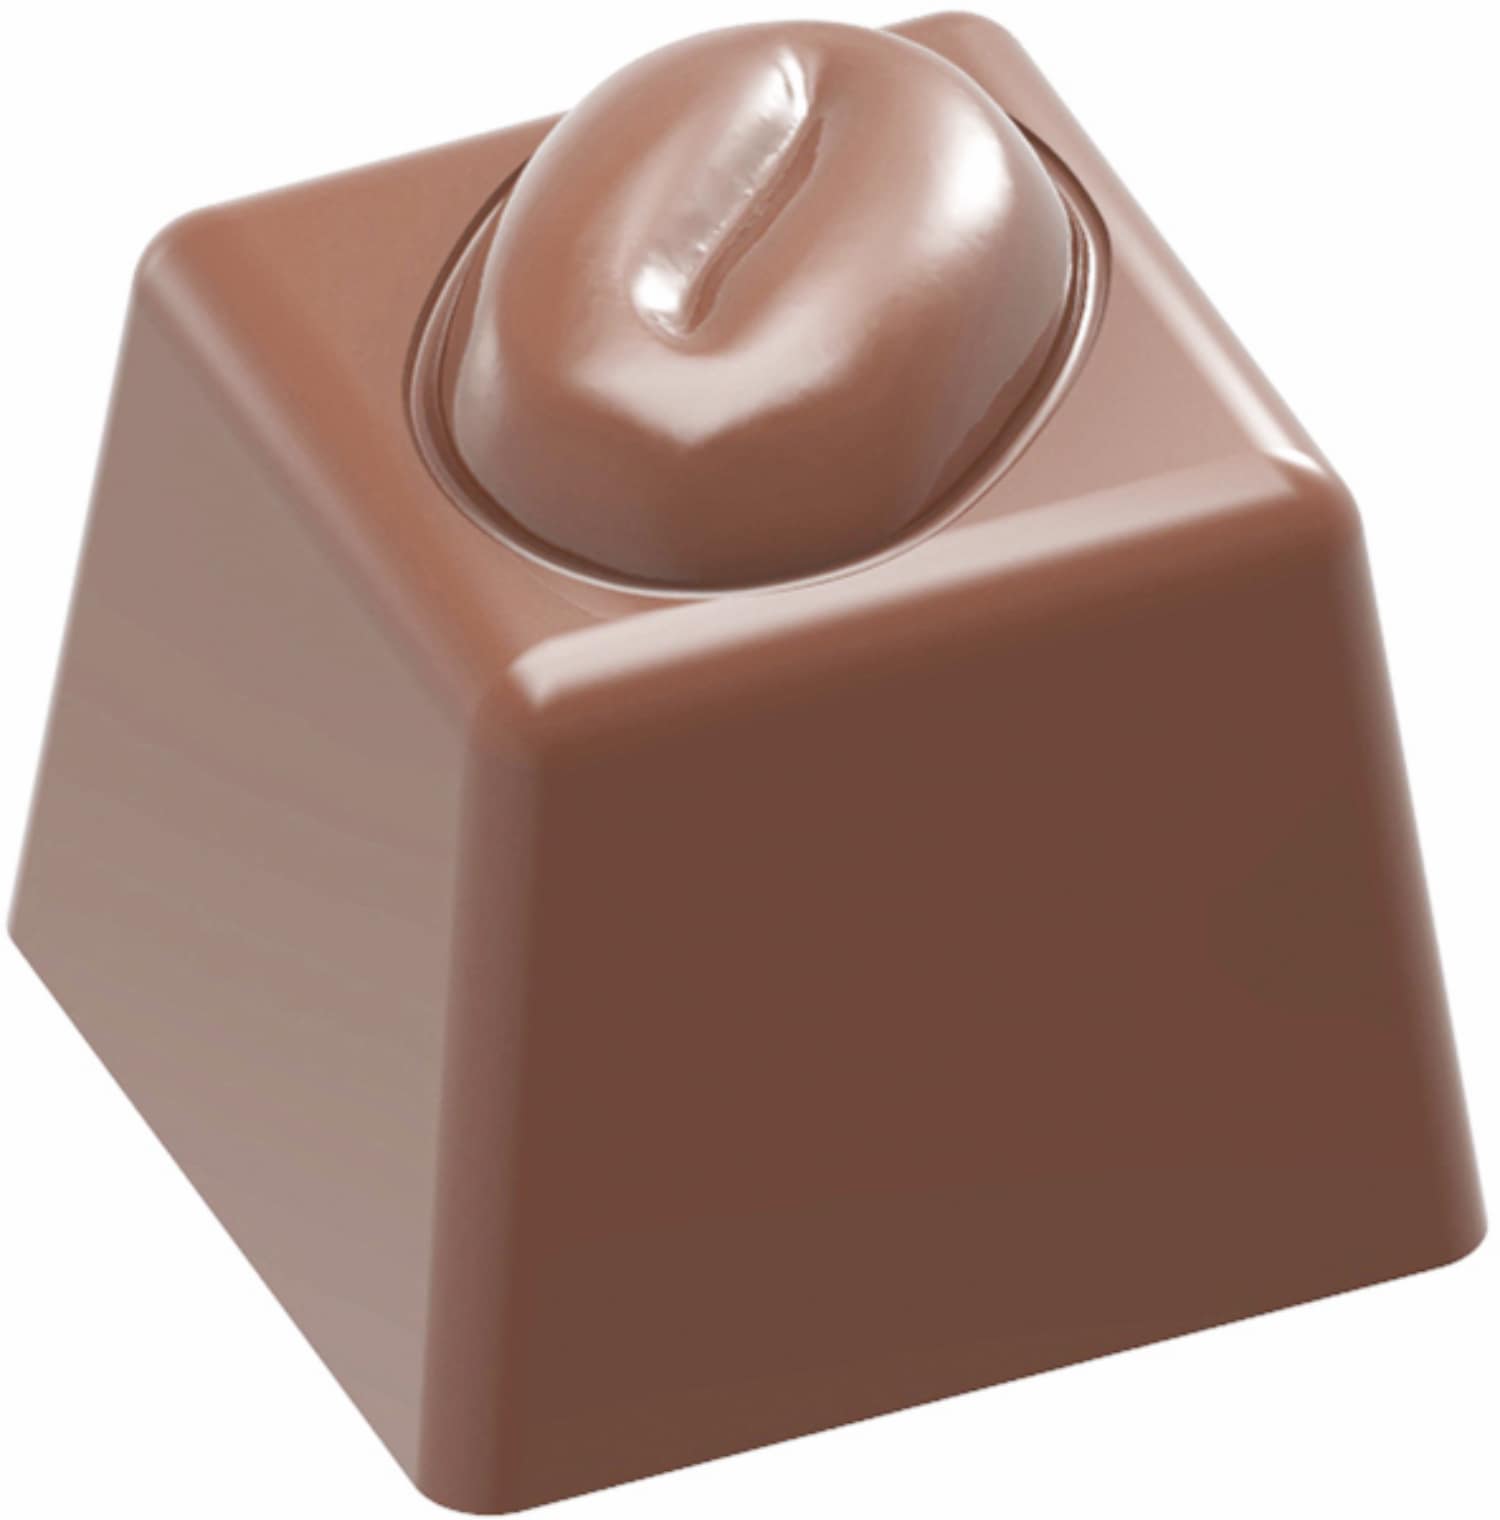 Chocolate mould "Coffee bean" 421880 421880